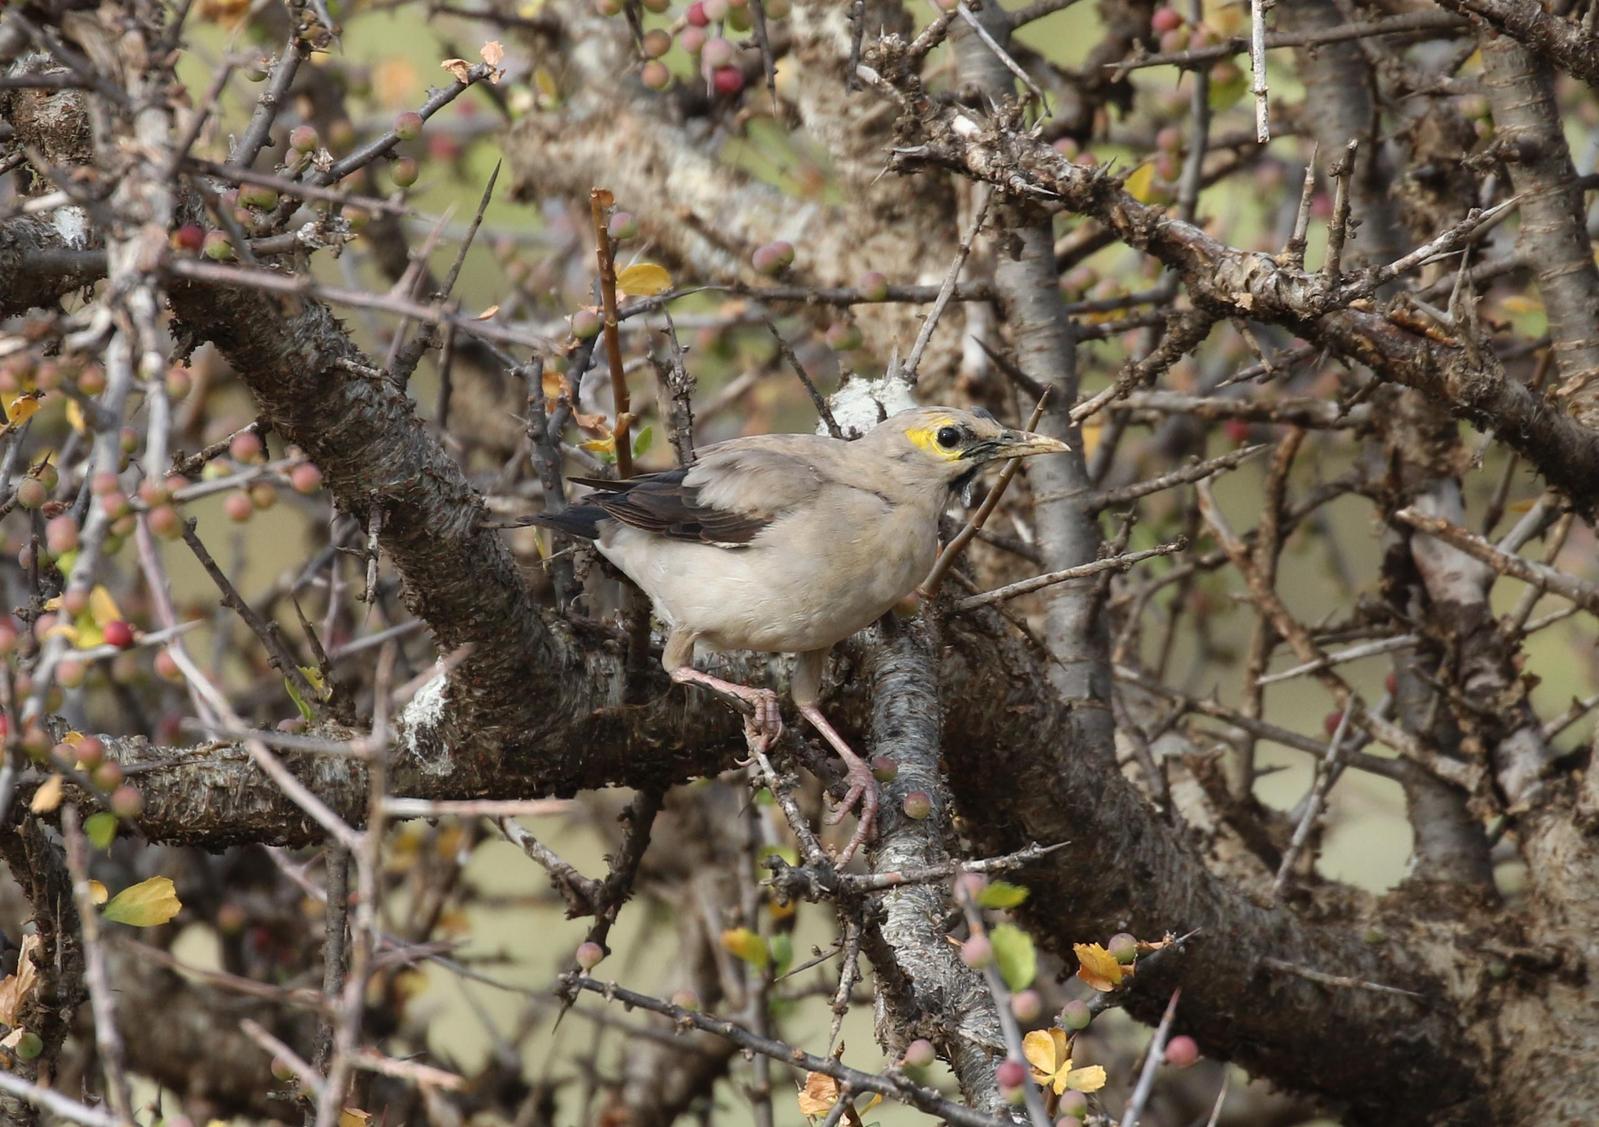 Wattled Starling Photo by Nate Dias